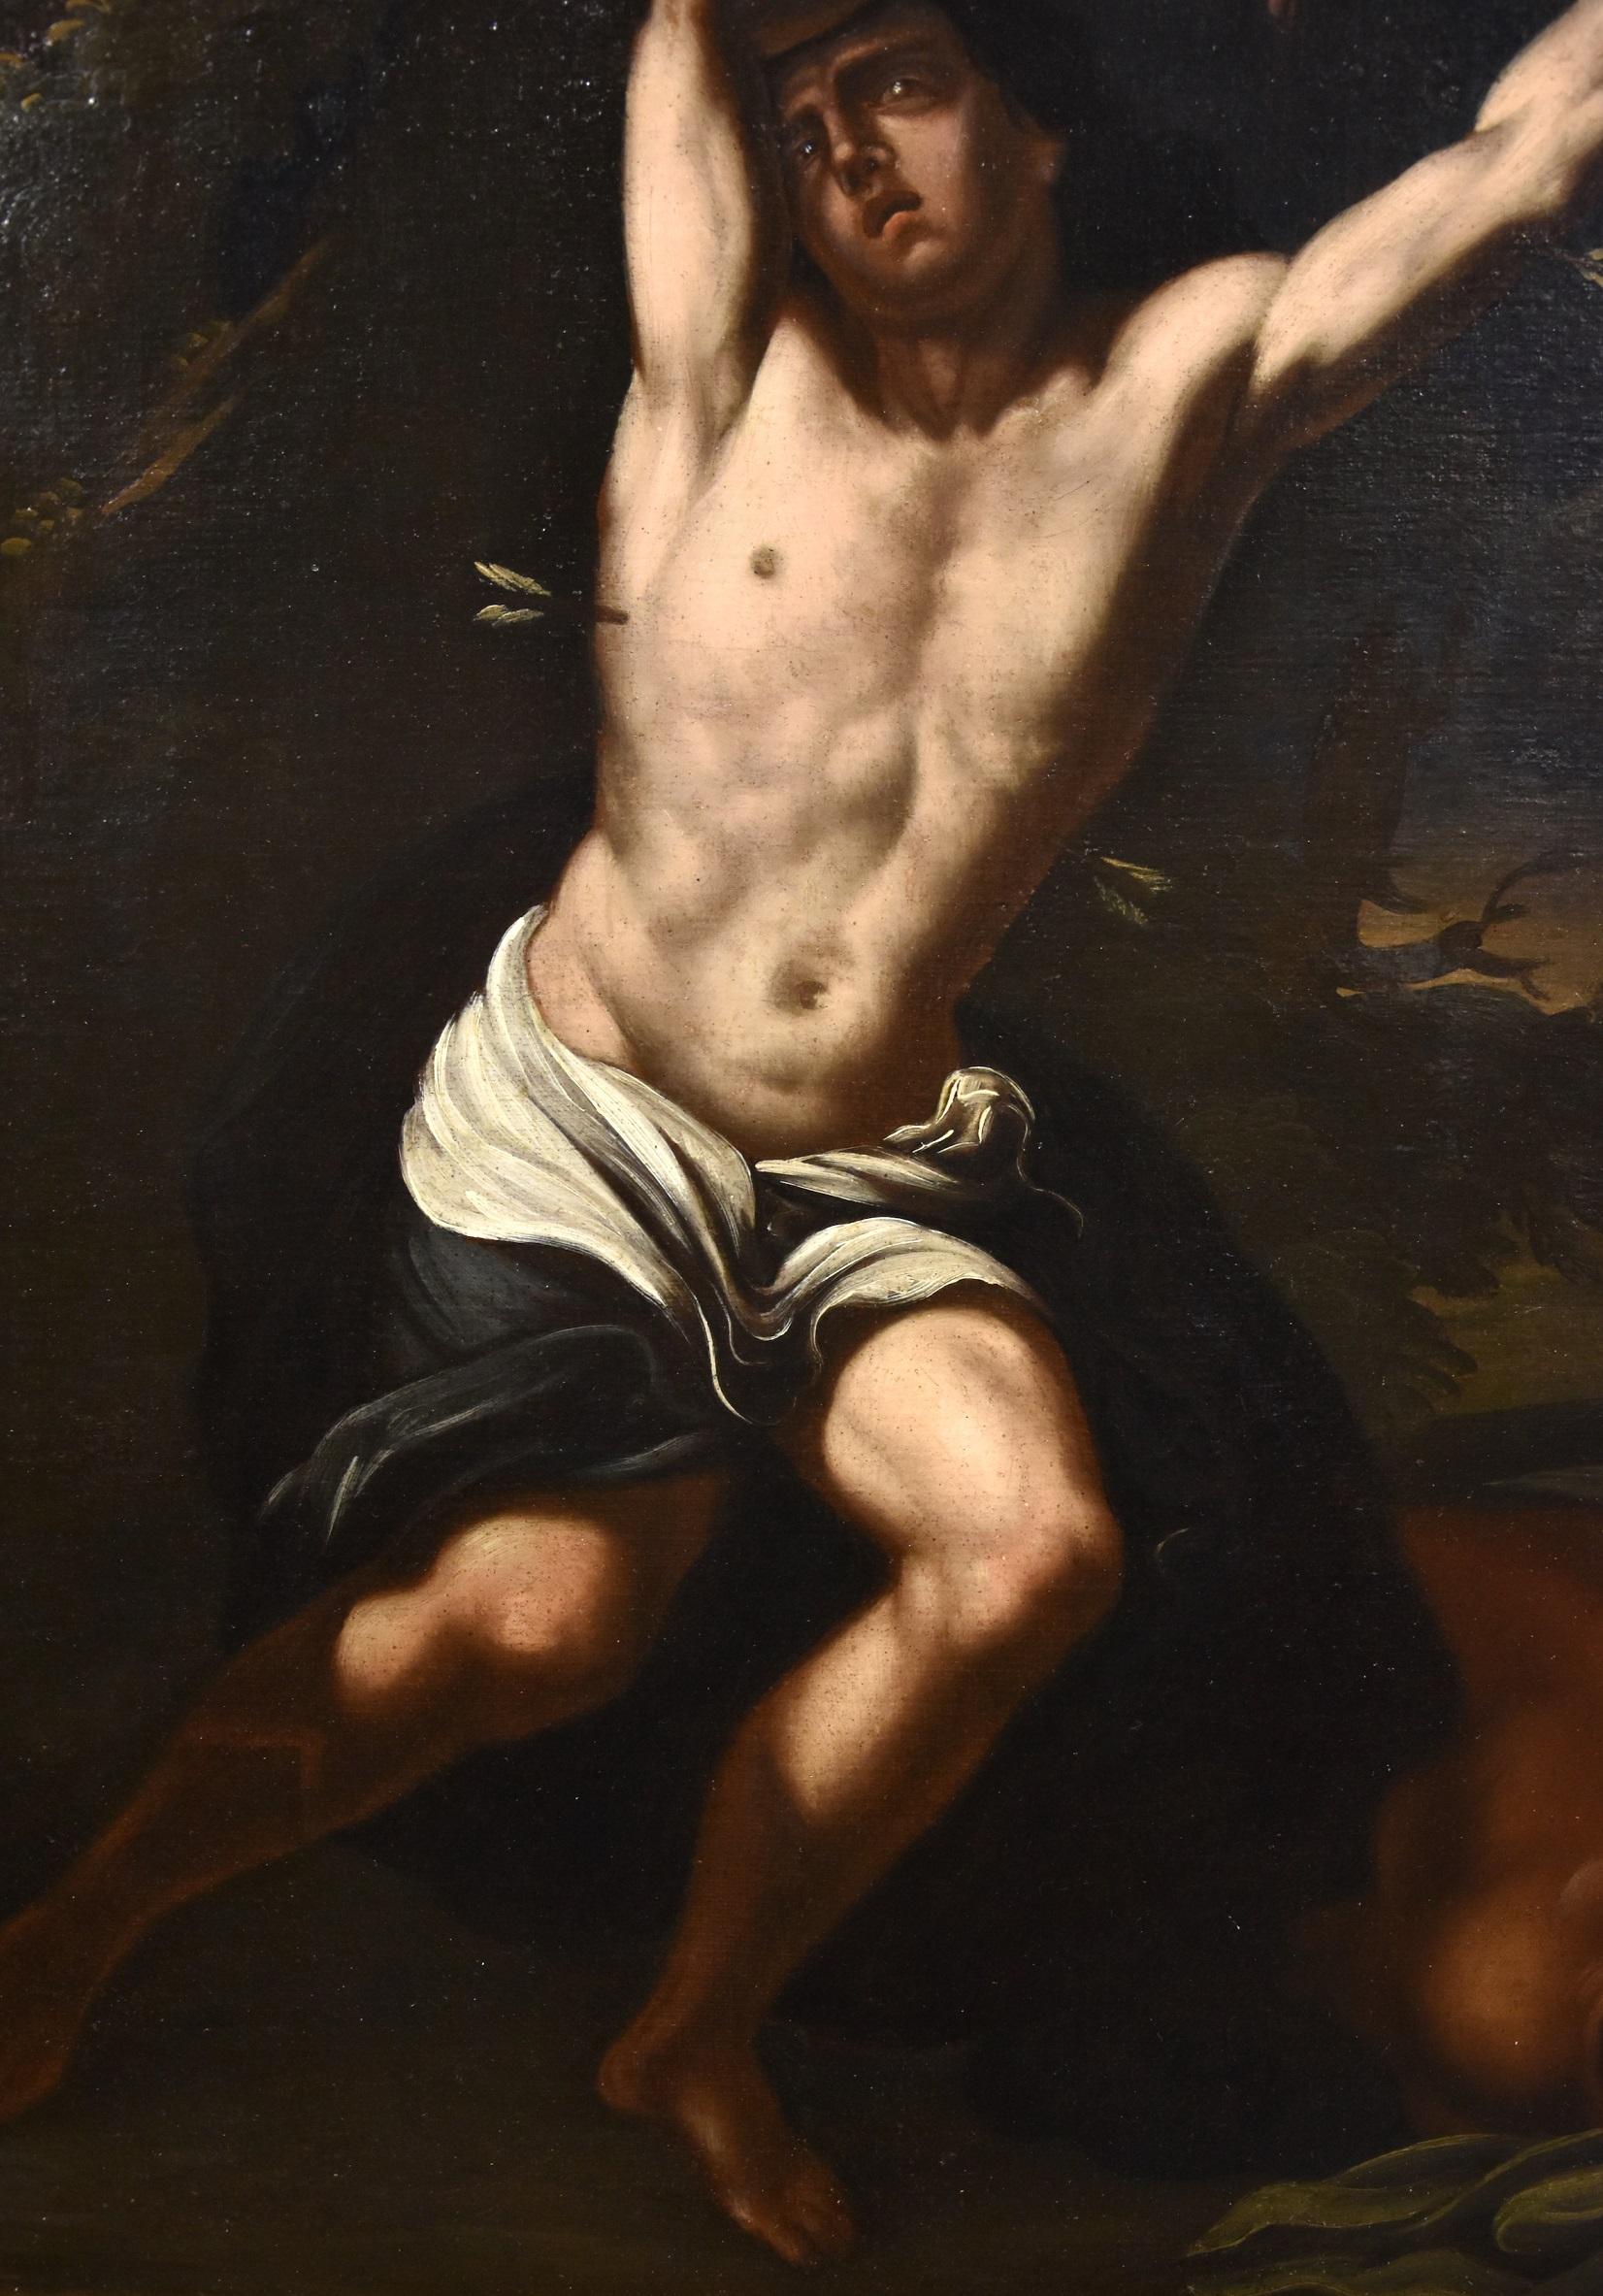 San Sebastian Crespi Paint Oil on canvas Old master 17th Century Michelangelo - Old Masters Painting by Daniele Crespi (Busto Arsizio, 1597-1600 - Milan 1630)